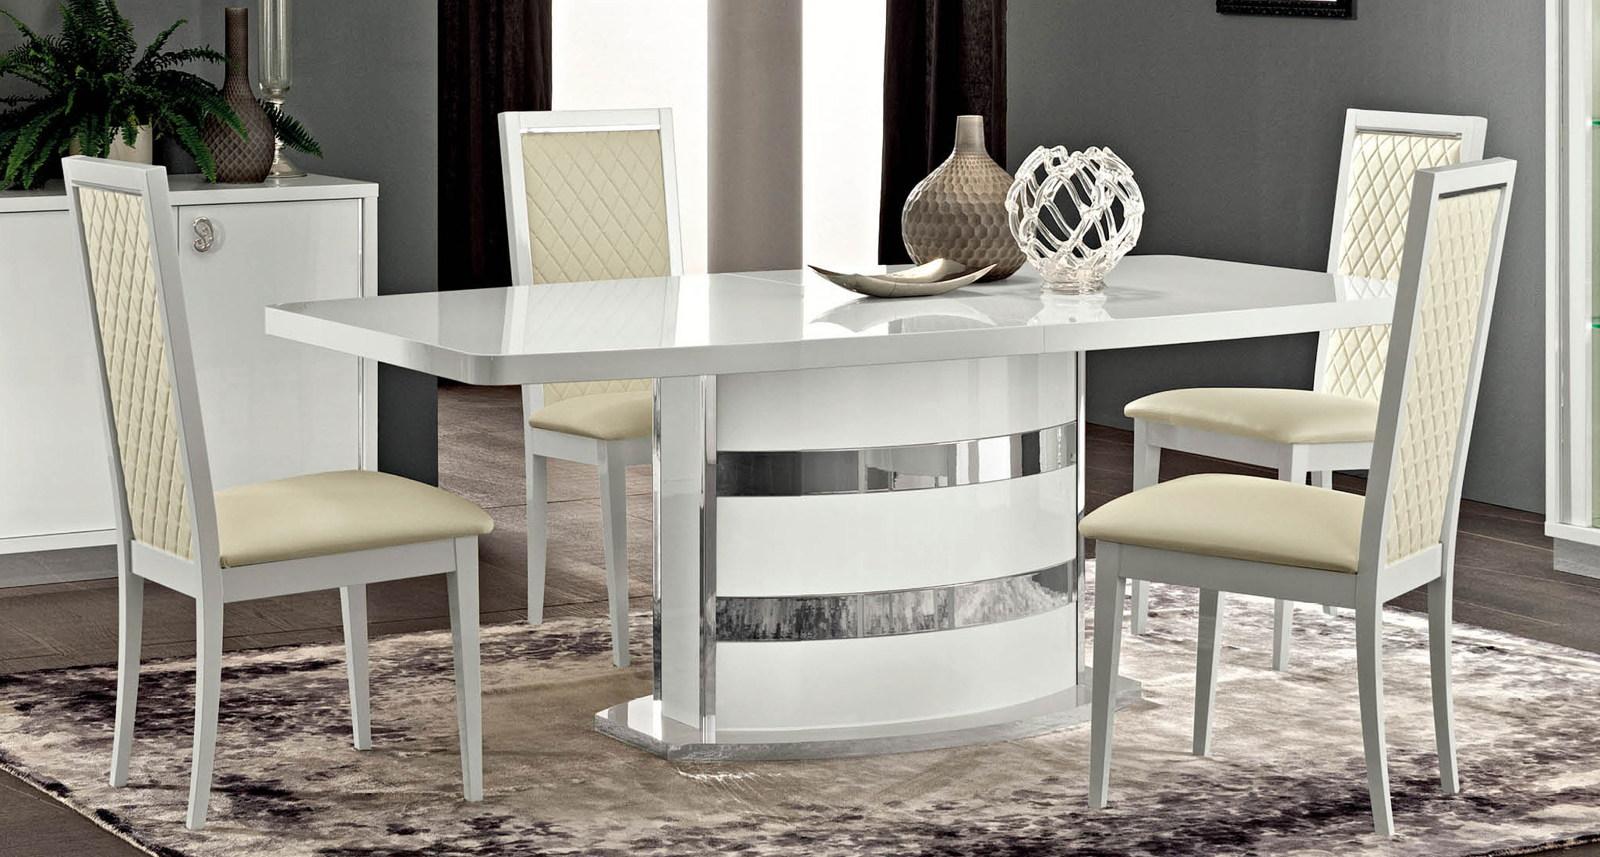 

    
Dining Room Set 7 Pcs High Gloss Pure White Contemporary Made in Italy ESF Roma  6357
